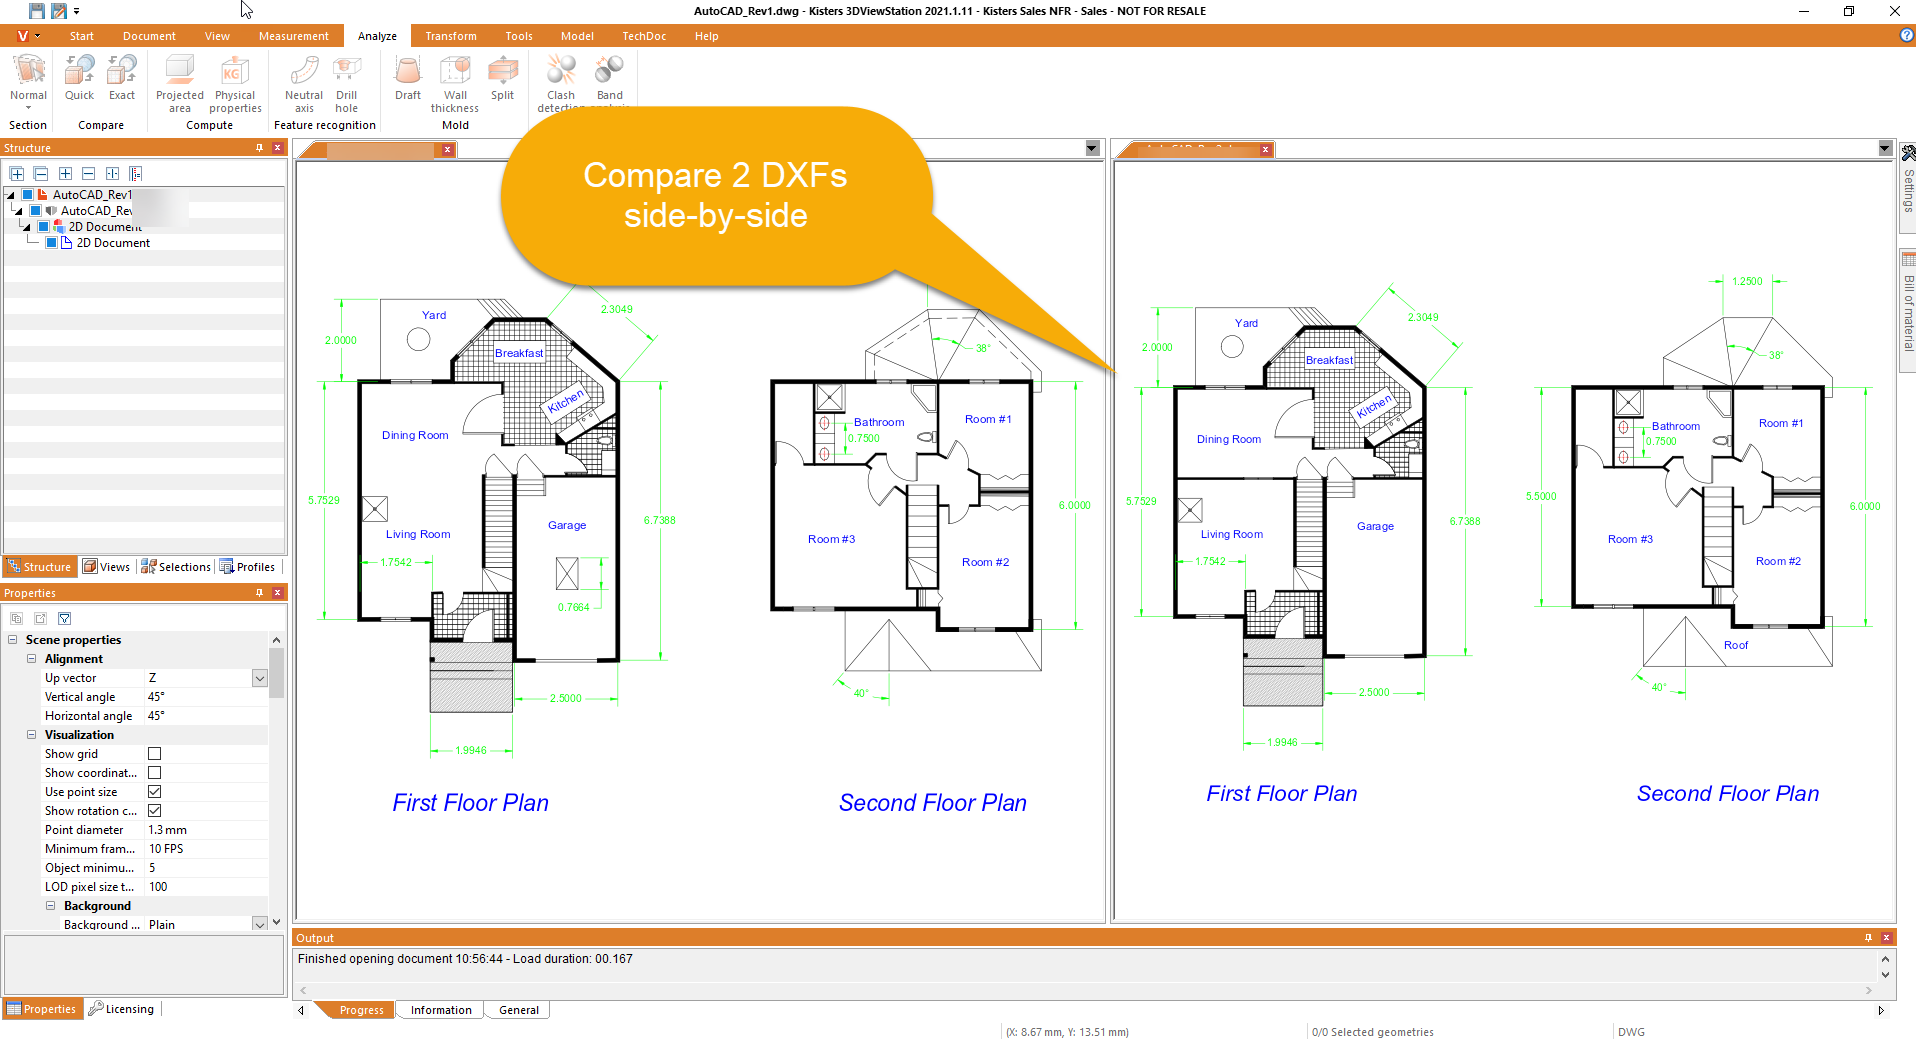 dxf viewer online trueview side-by-side compare vergleich